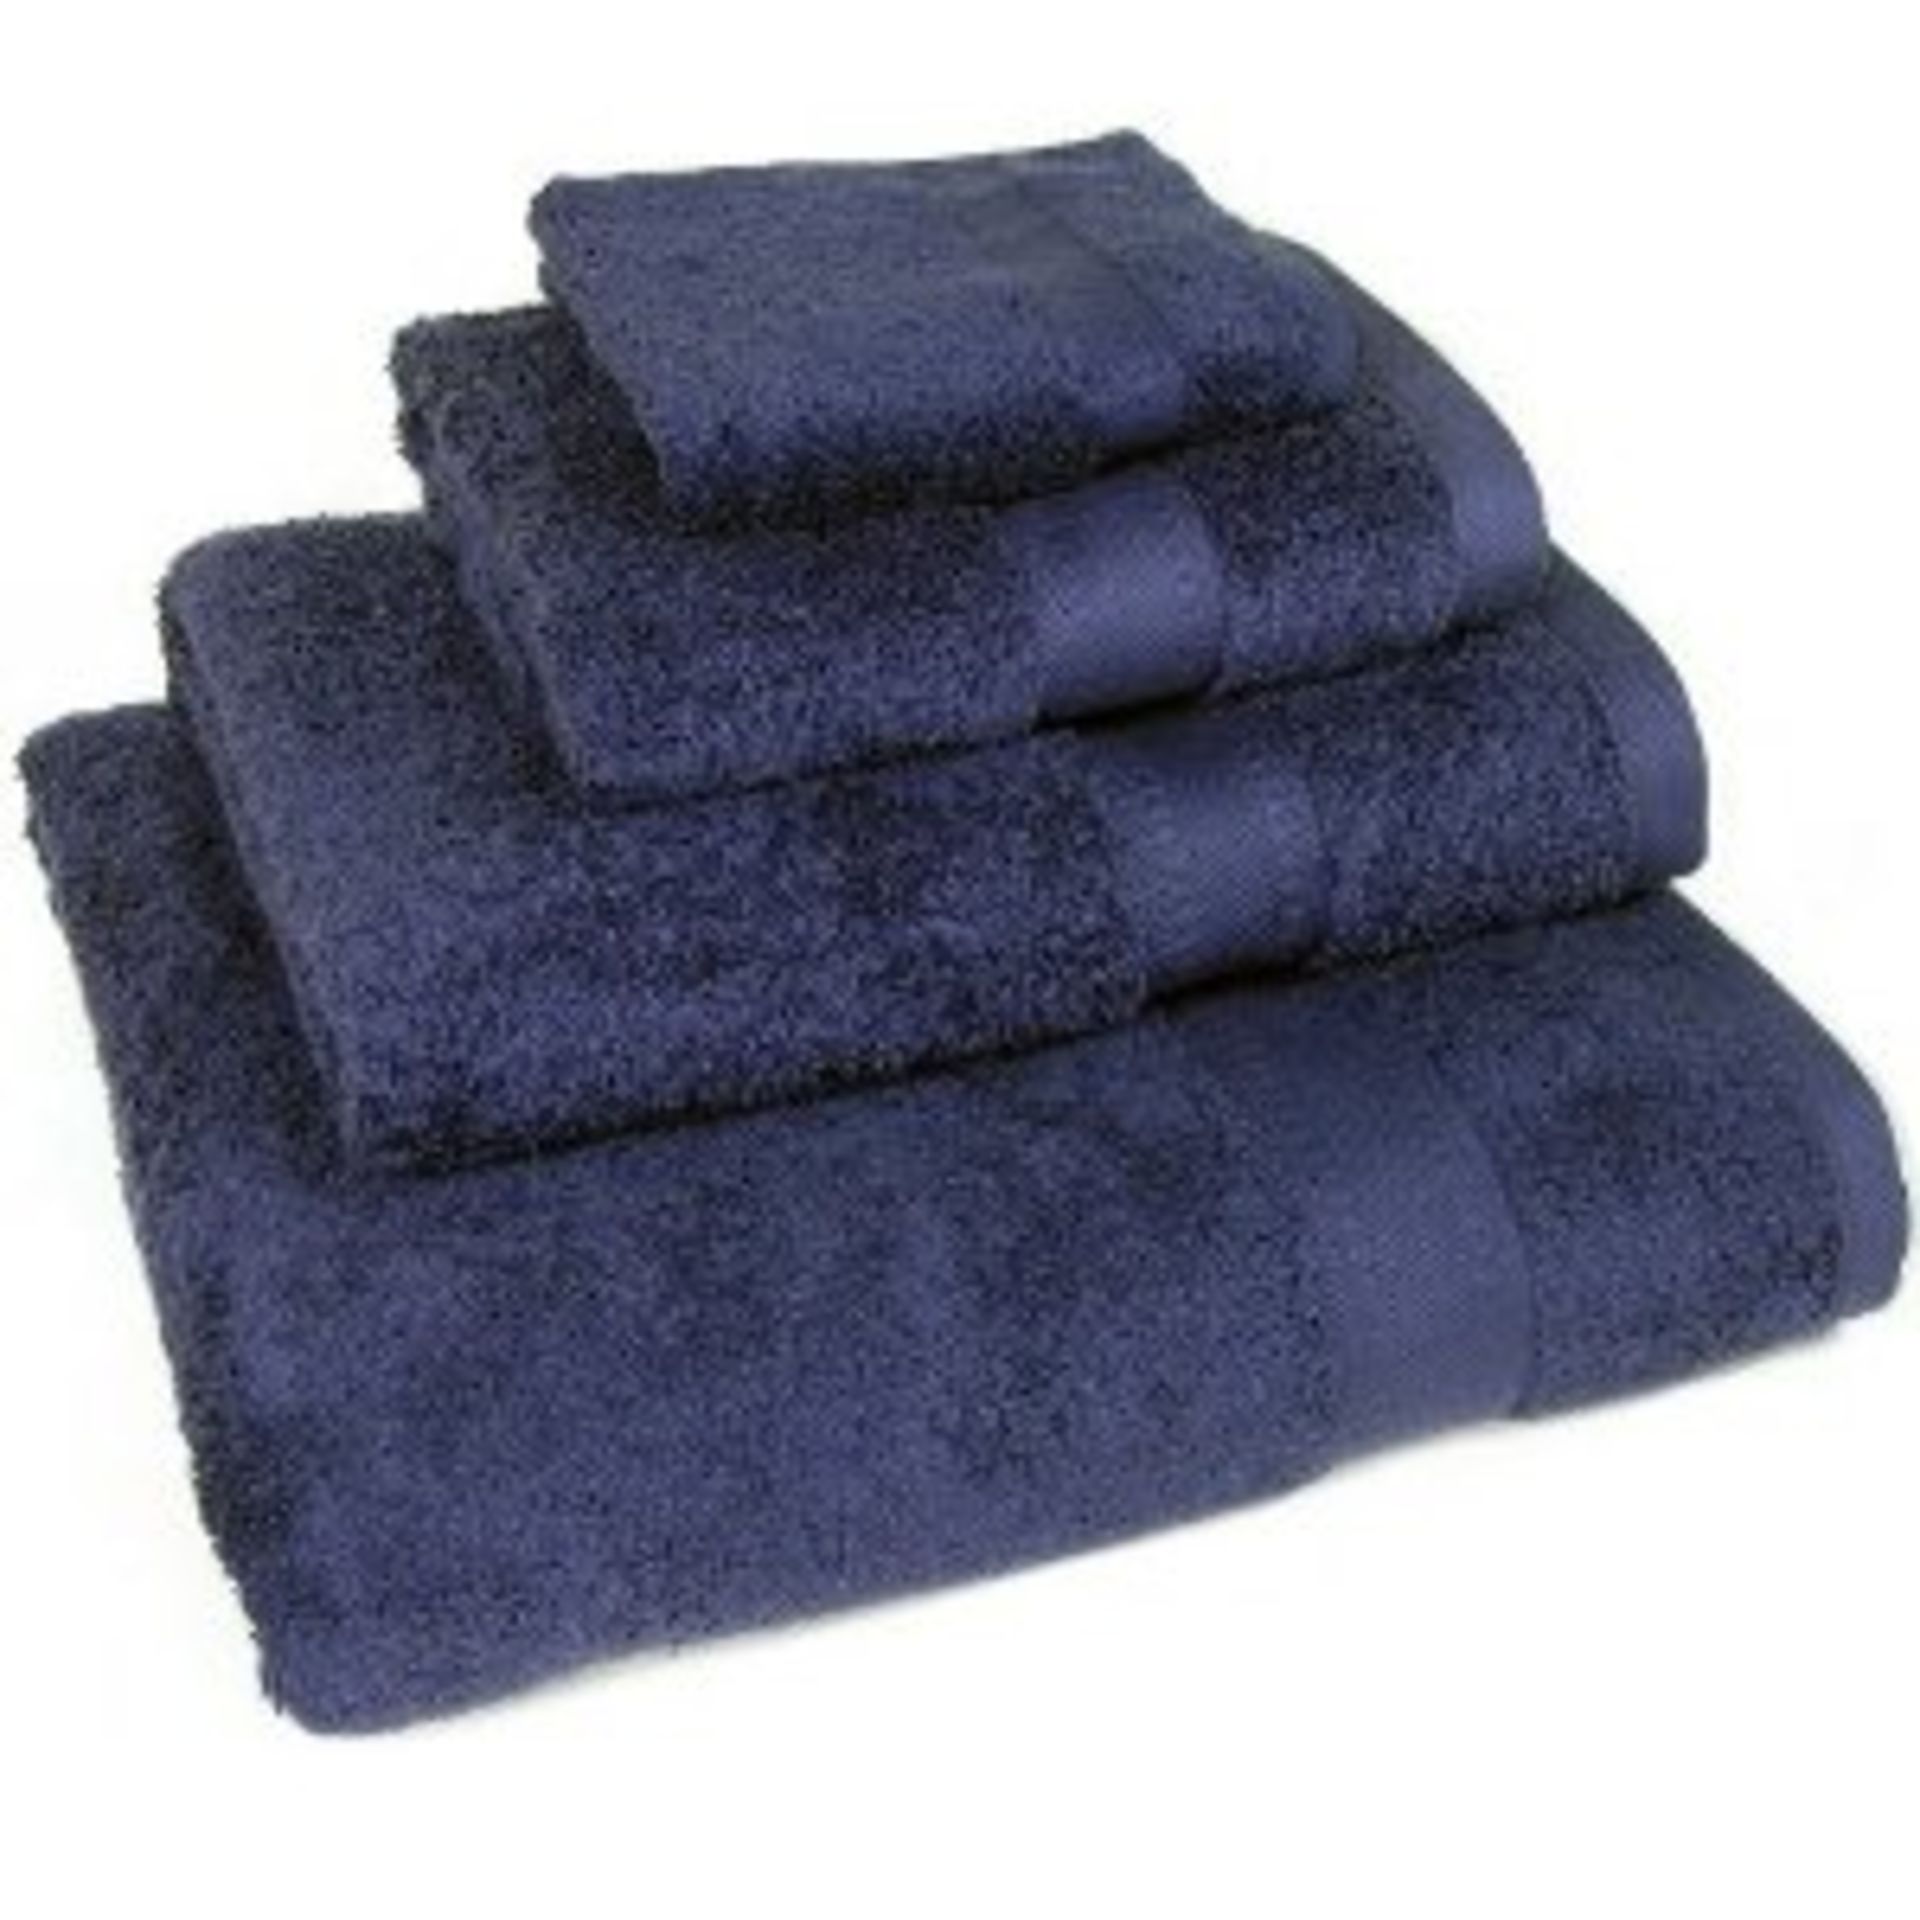 V Brand New Blue Six Piece Towel Bale Set Includes 2 Bath Towels 2 Hand Towels and 2 Face Towels